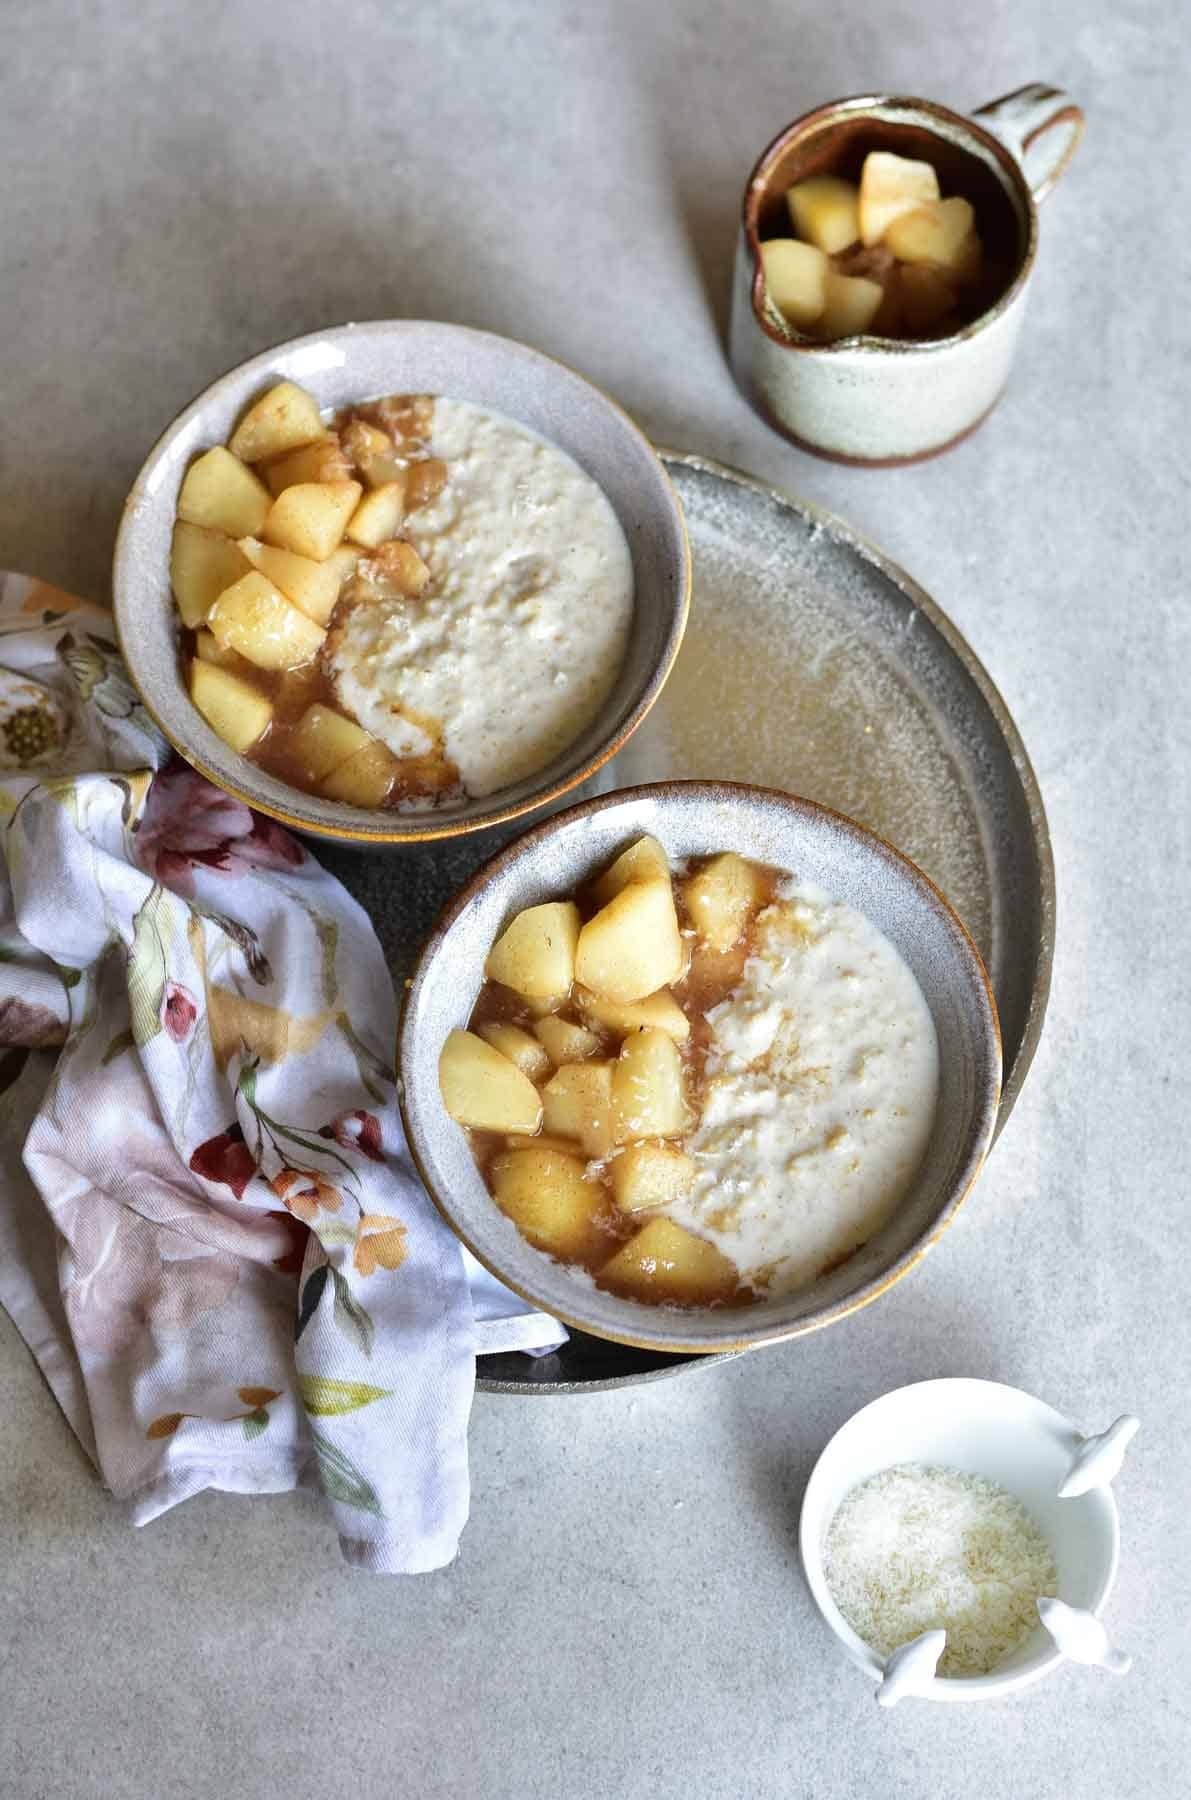 two bowls with creamy coconut oatmeal with spiced pears